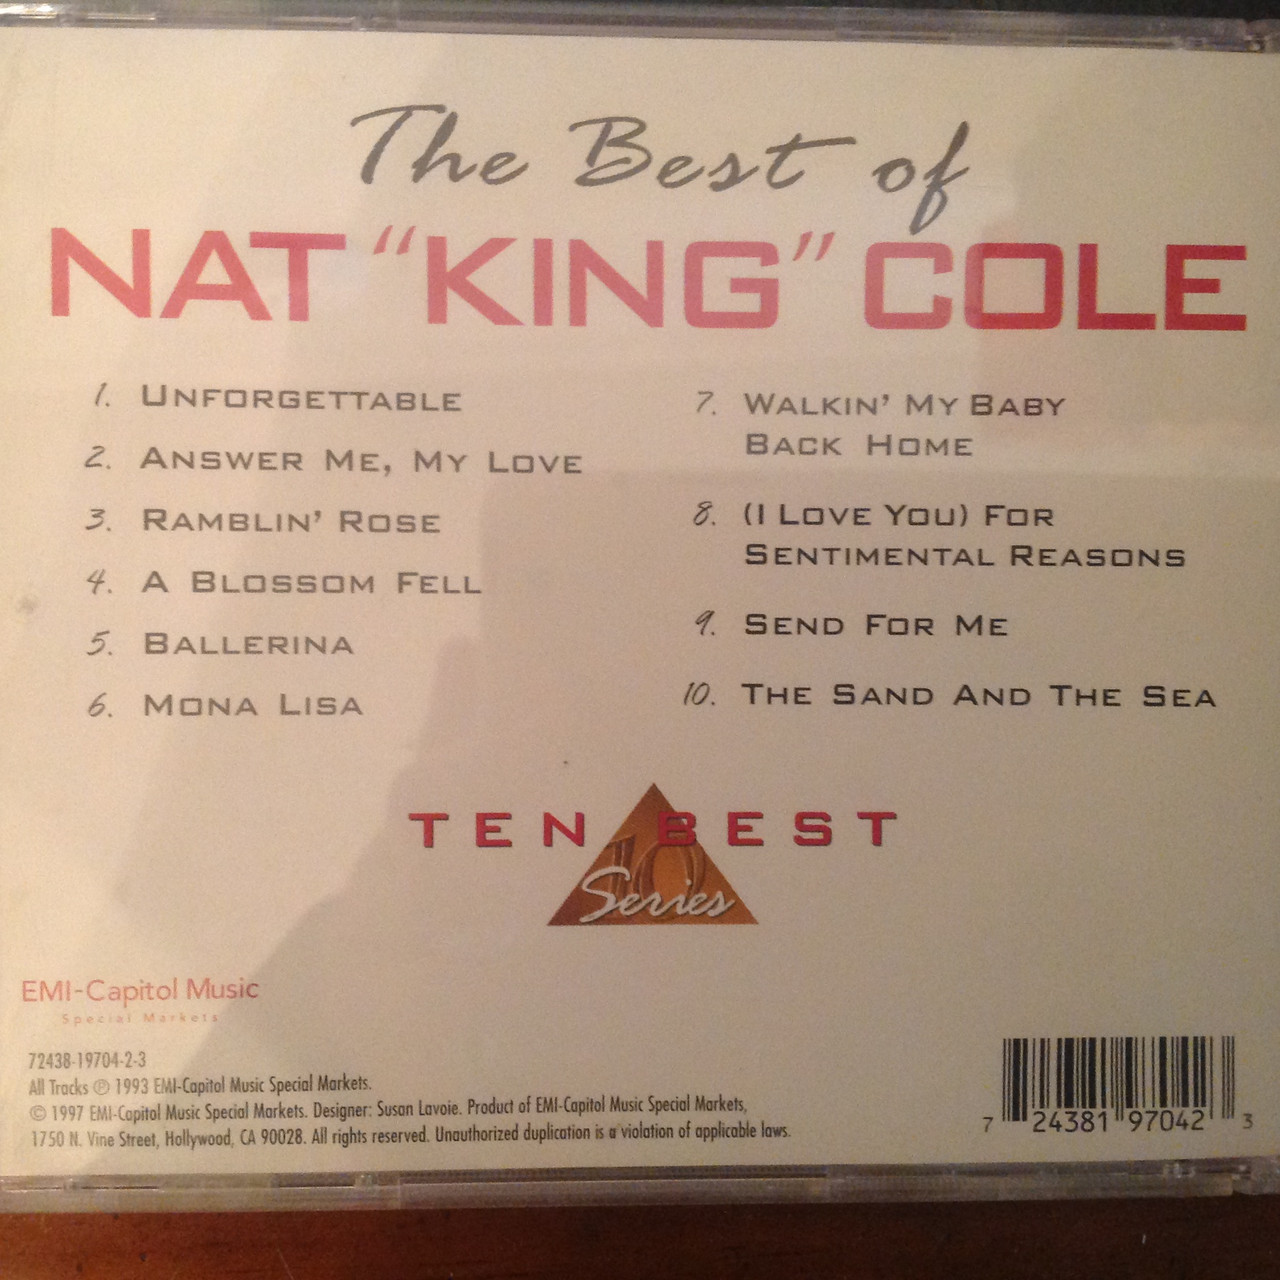 The Best of Nat "King" Cole CD